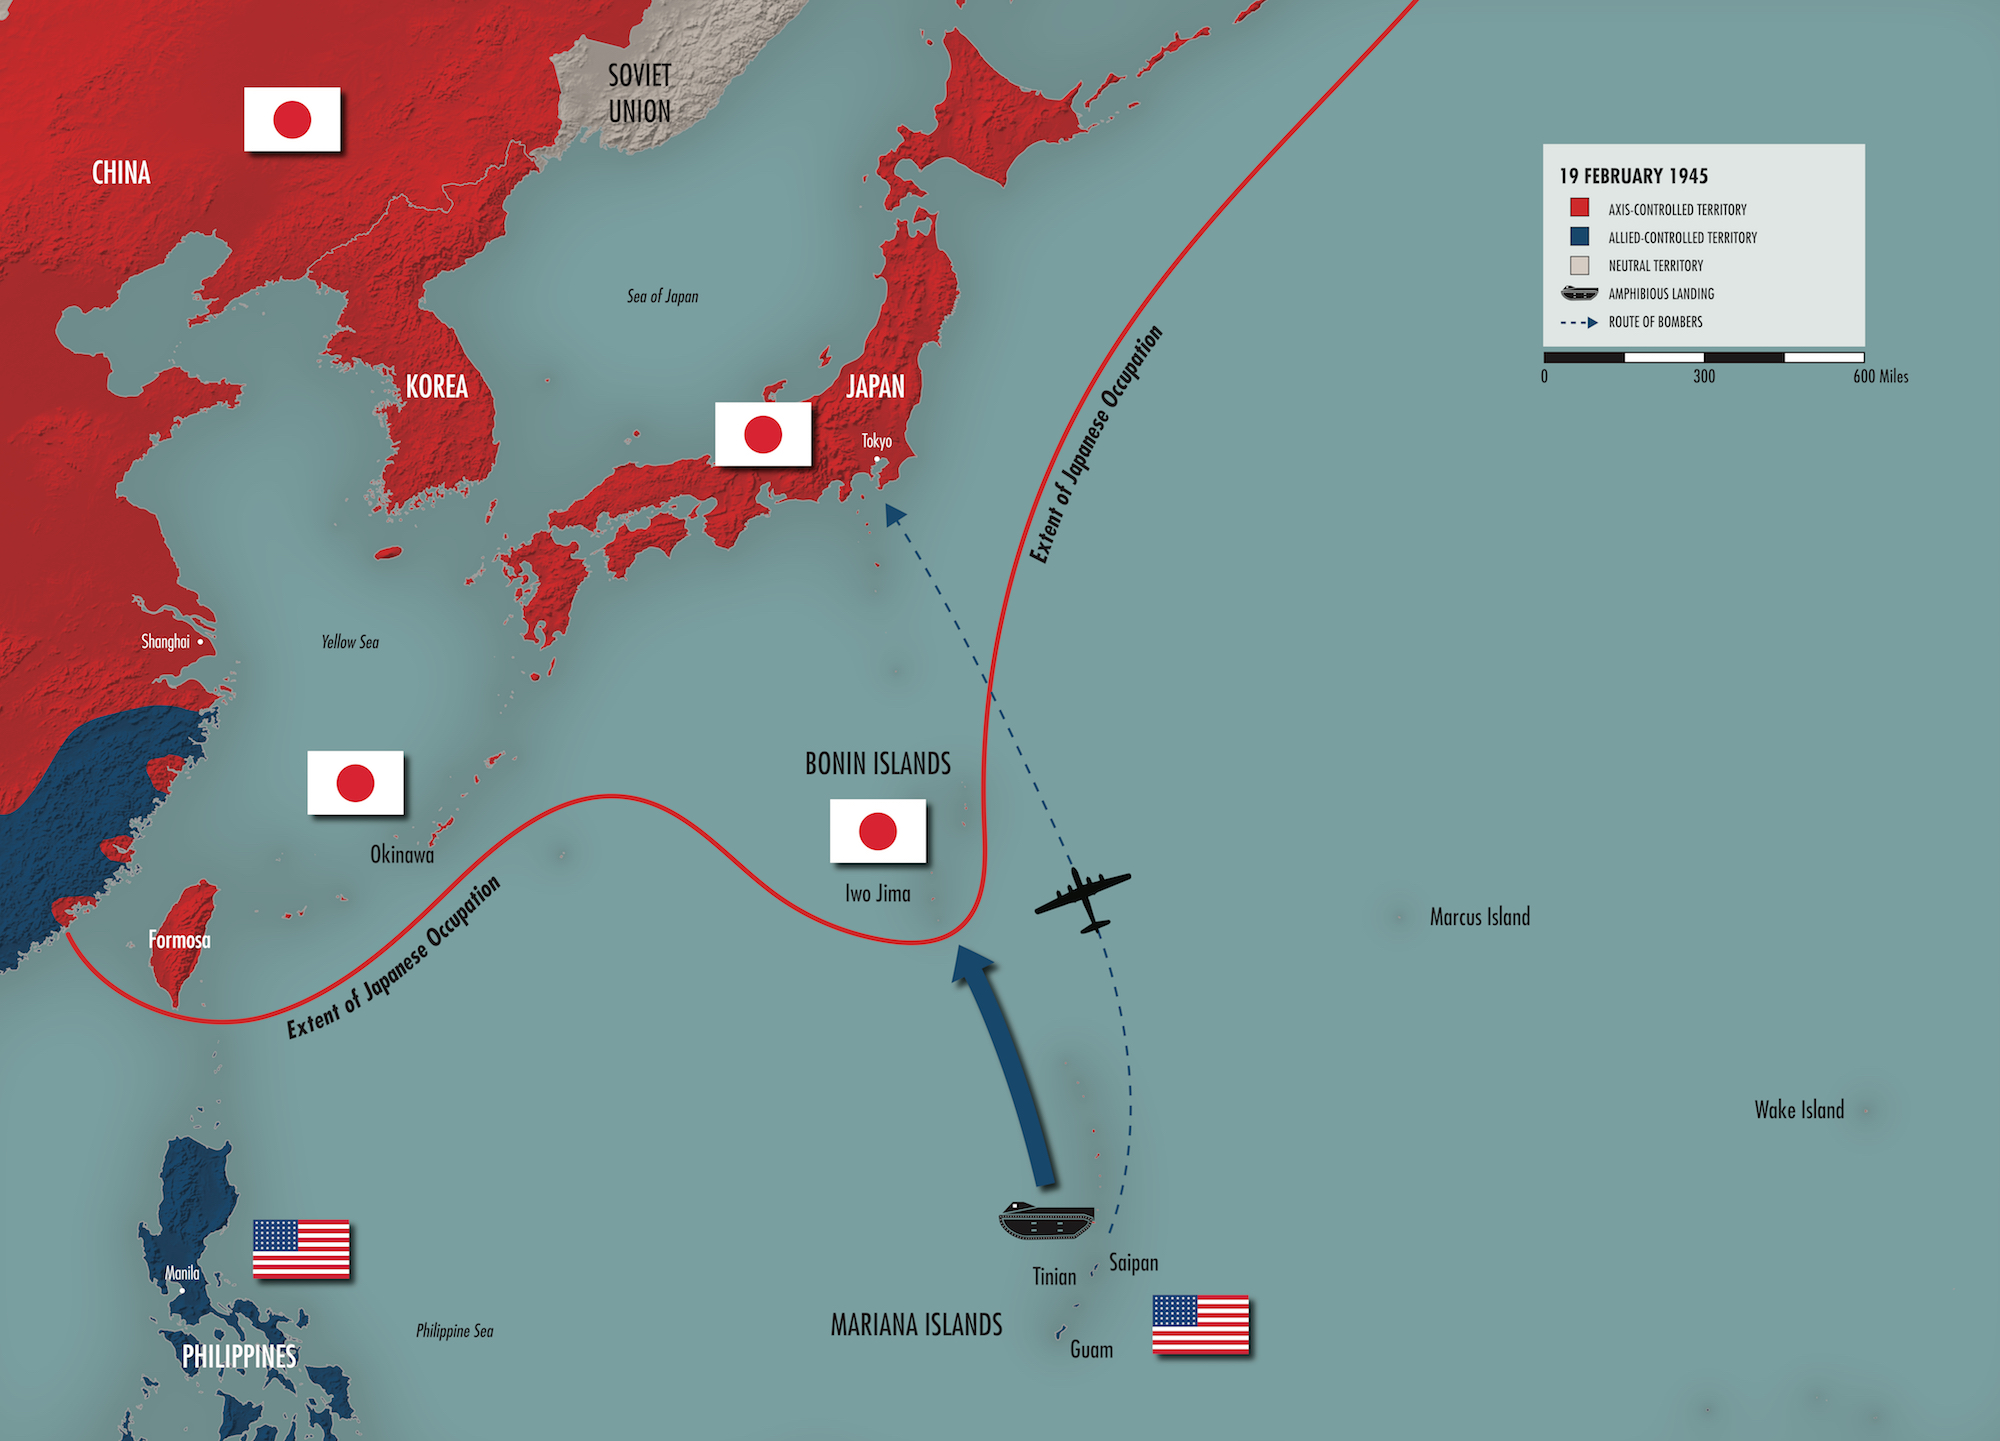 During the War in the Pacific who was man in charge of the Japanese Navy?